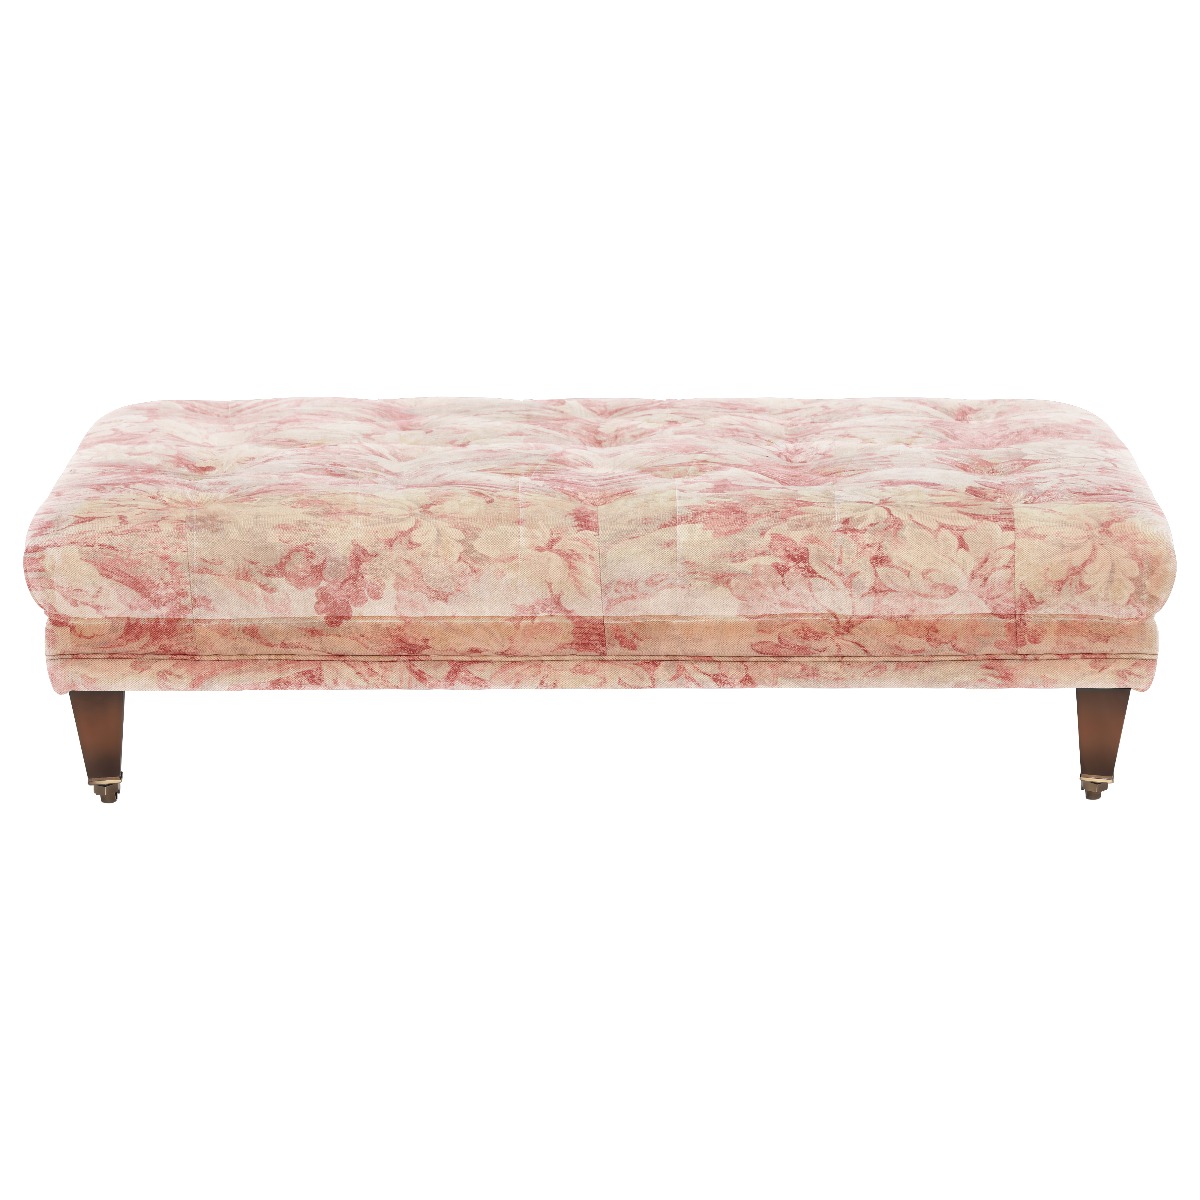 Blackwell Small Button Stool, Pink Fabric | Barker & Stonehouse